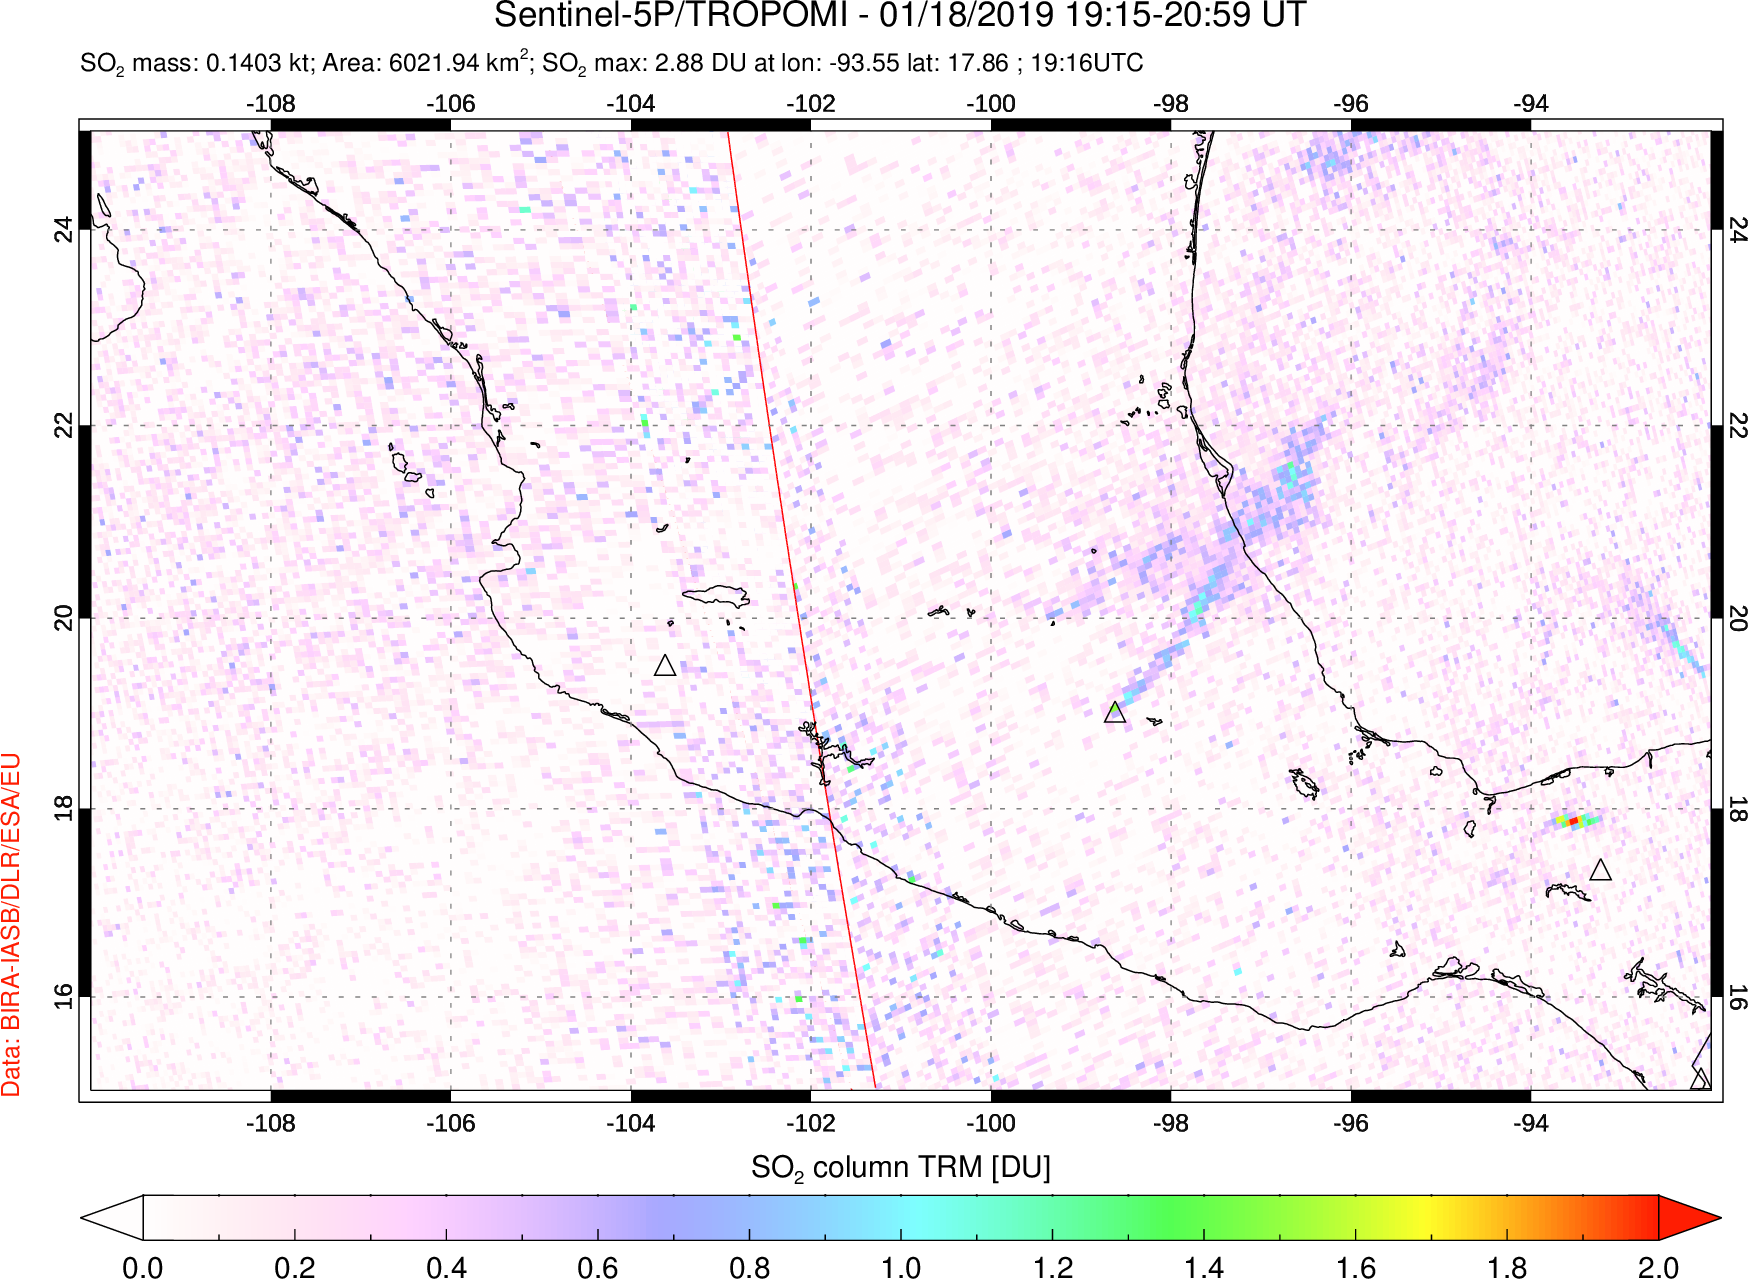 A sulfur dioxide image over Mexico on Jan 18, 2019.